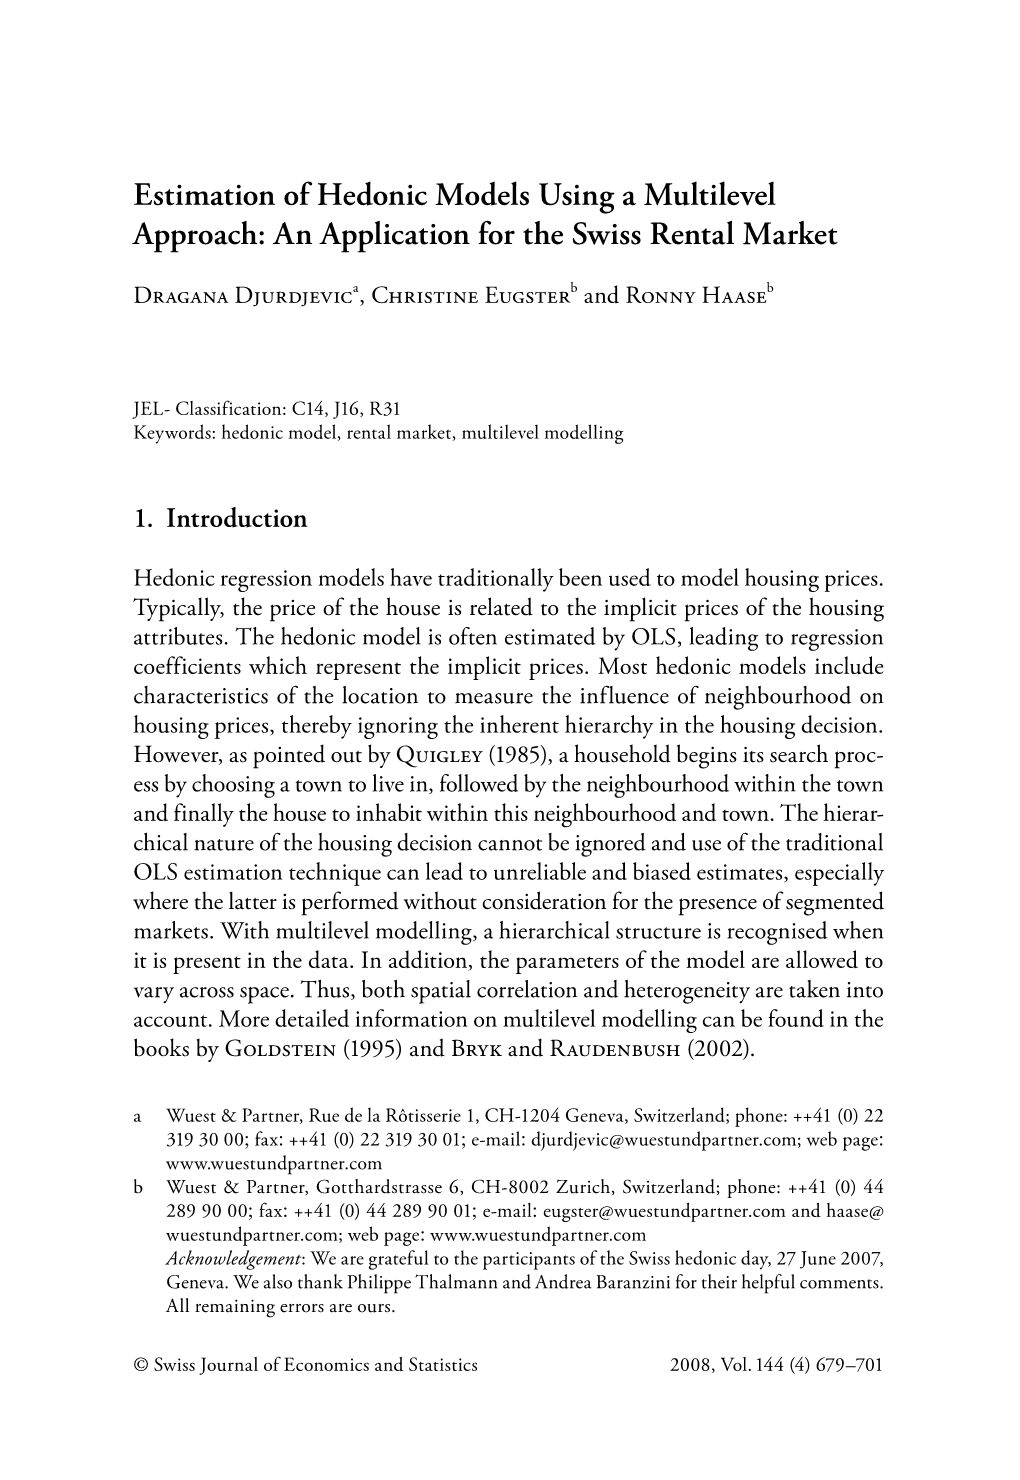 Estimation of Hedonic Models Using a Multilevel Approach: an Application for the Swiss Rental Market